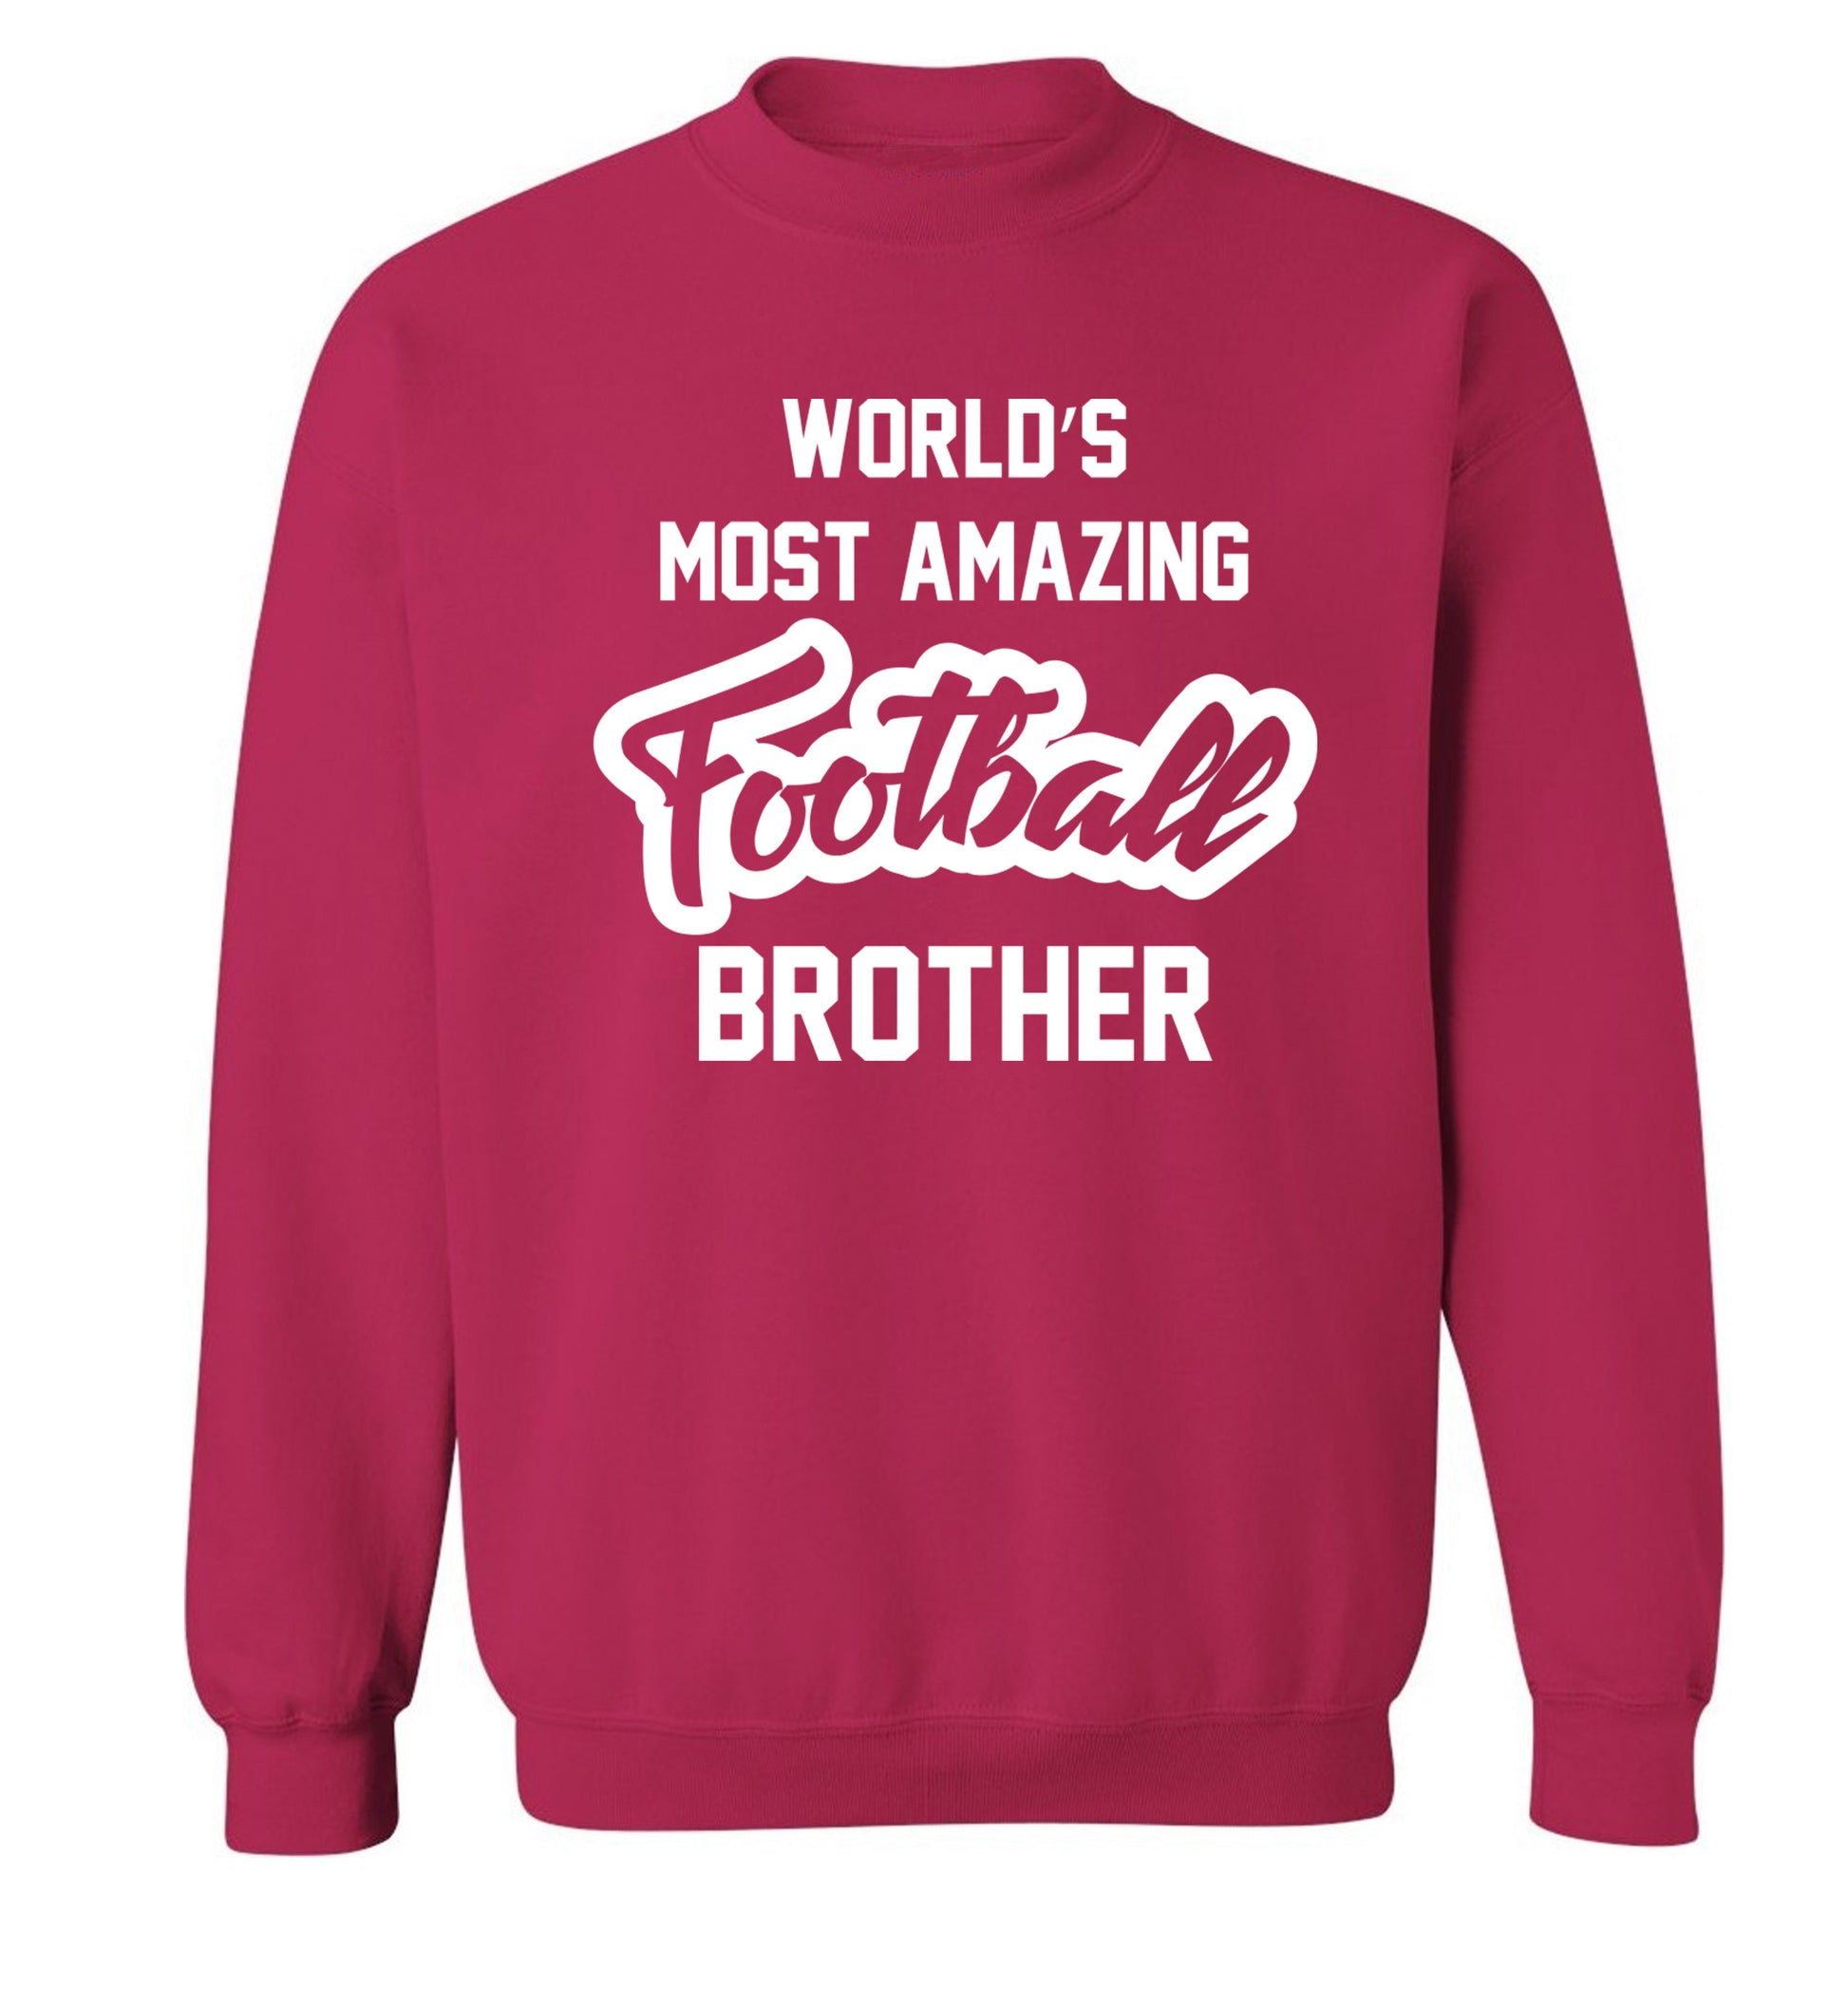 Worlds most amazing football brother Adult's unisexpink Sweater 2XL